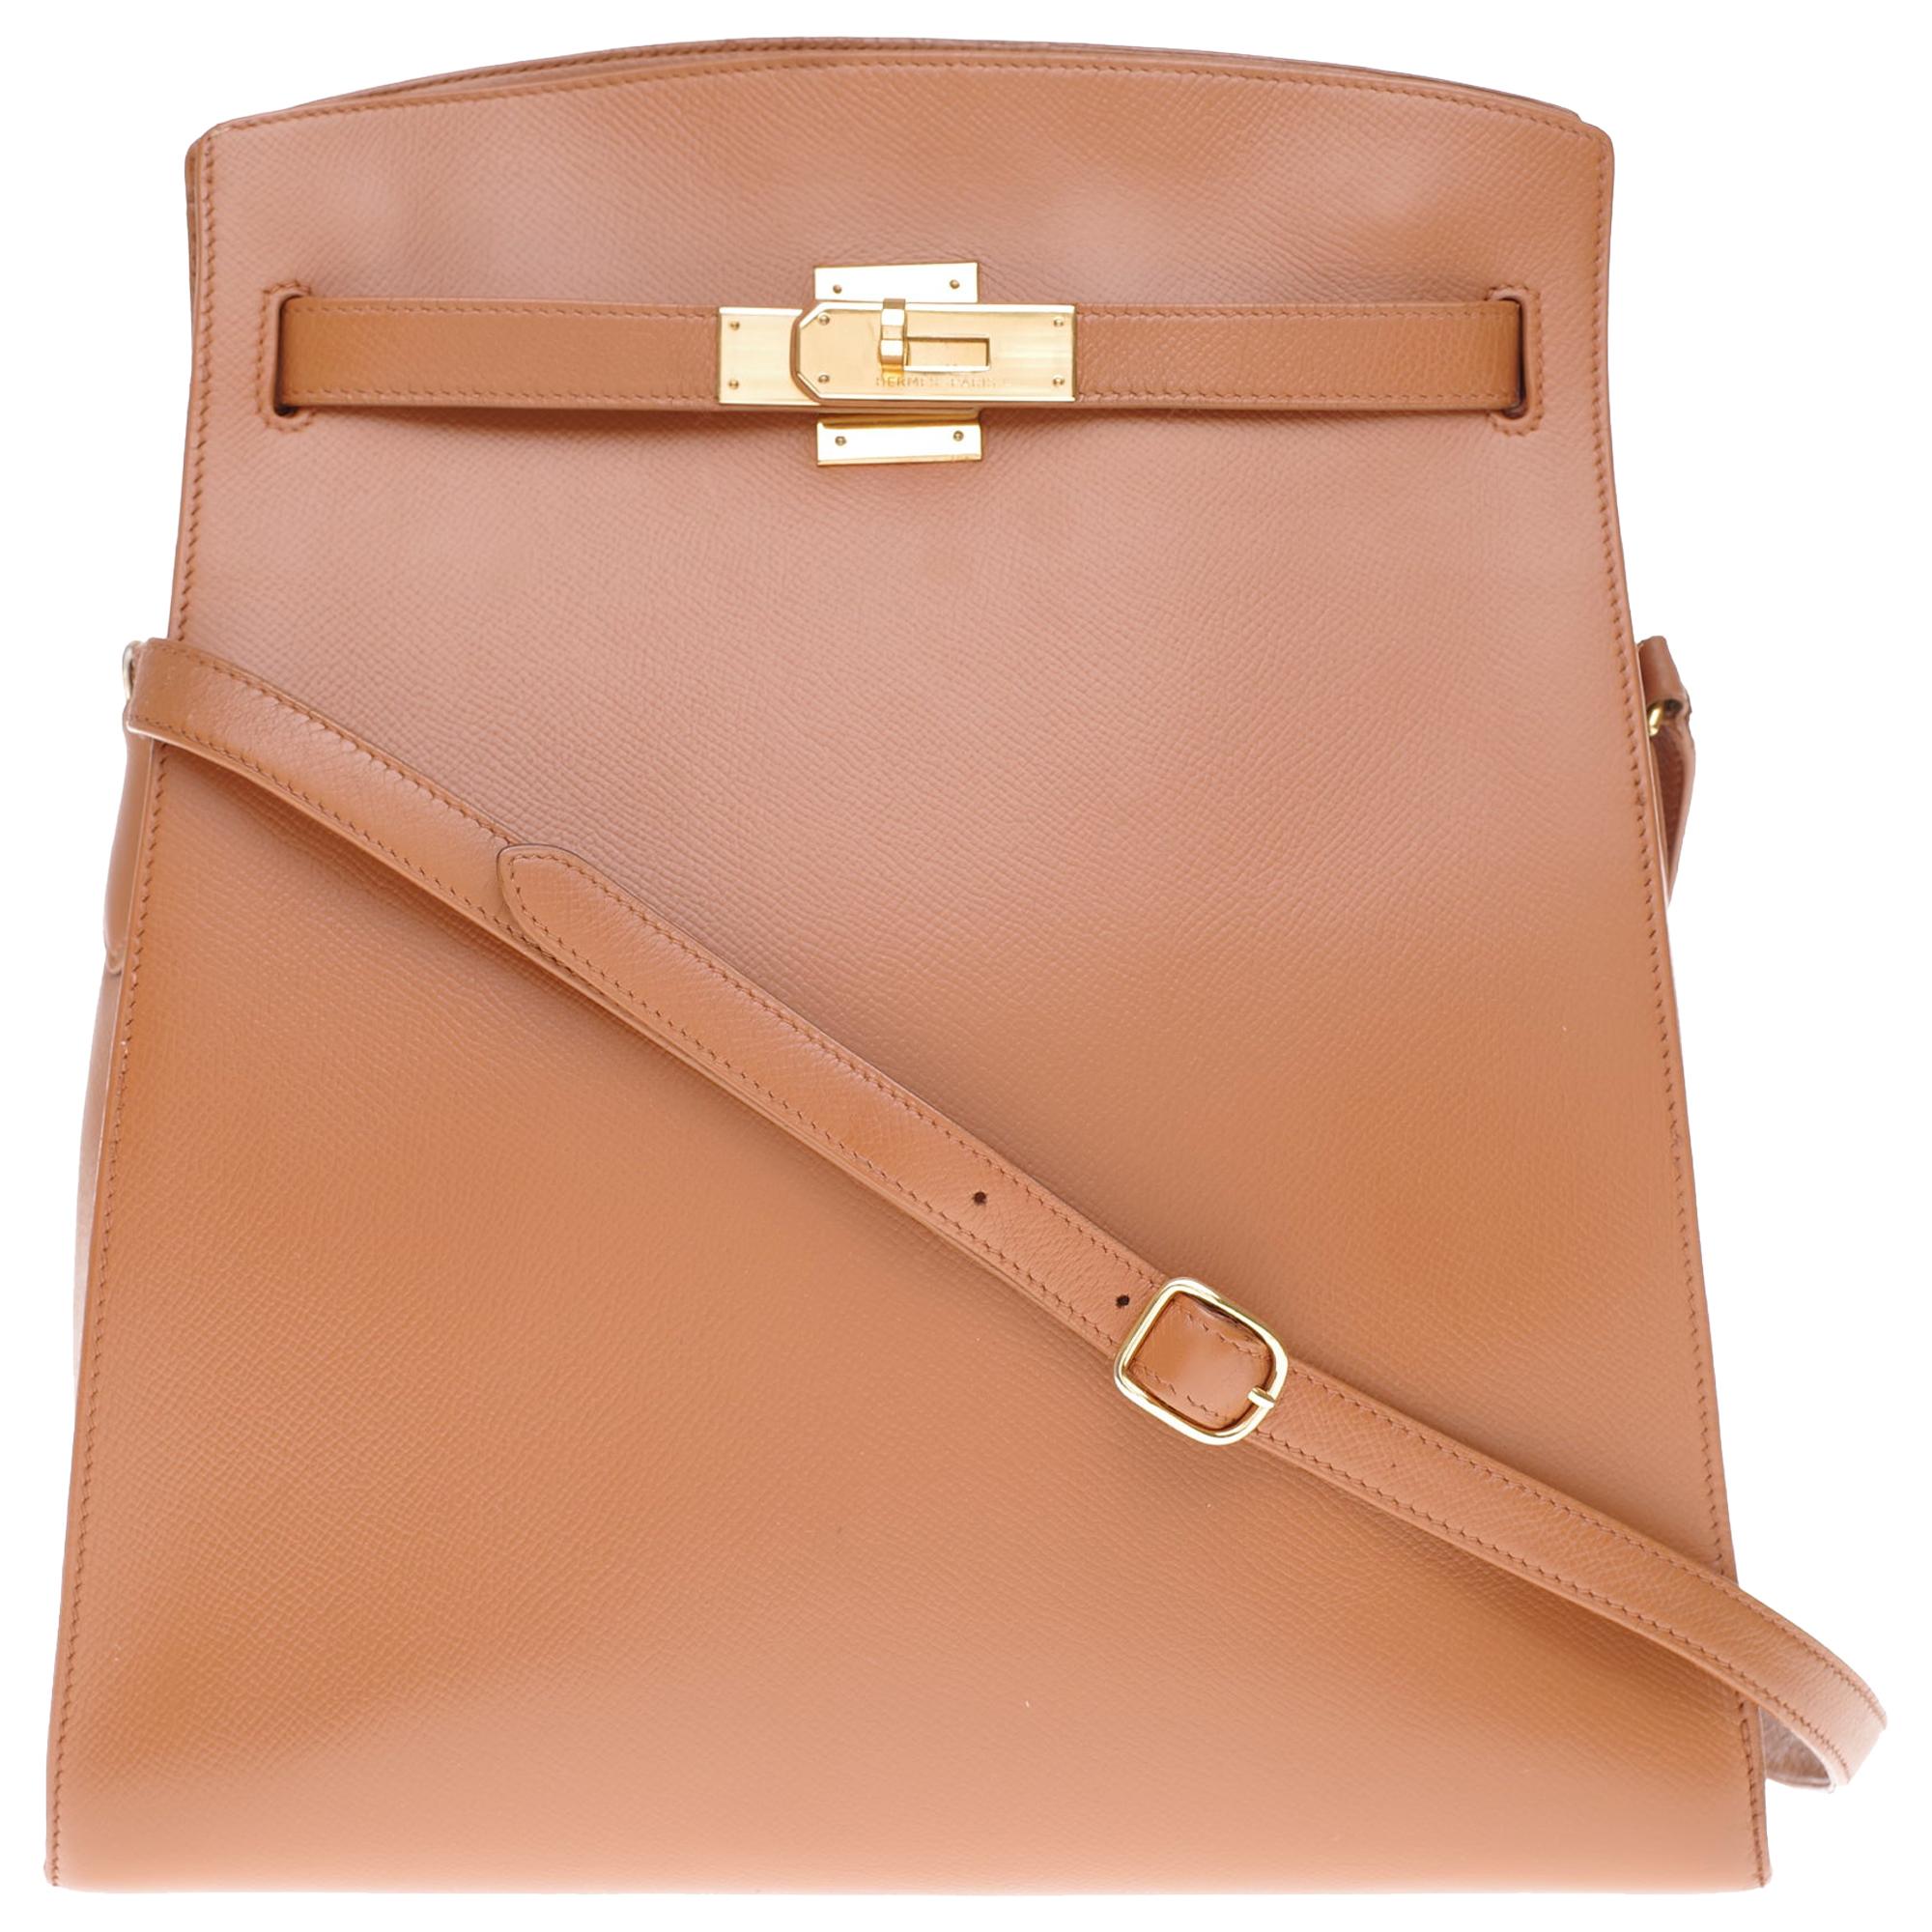 Hermès Kelly sport shoulder bag in courchevel gold leather with gold hardware